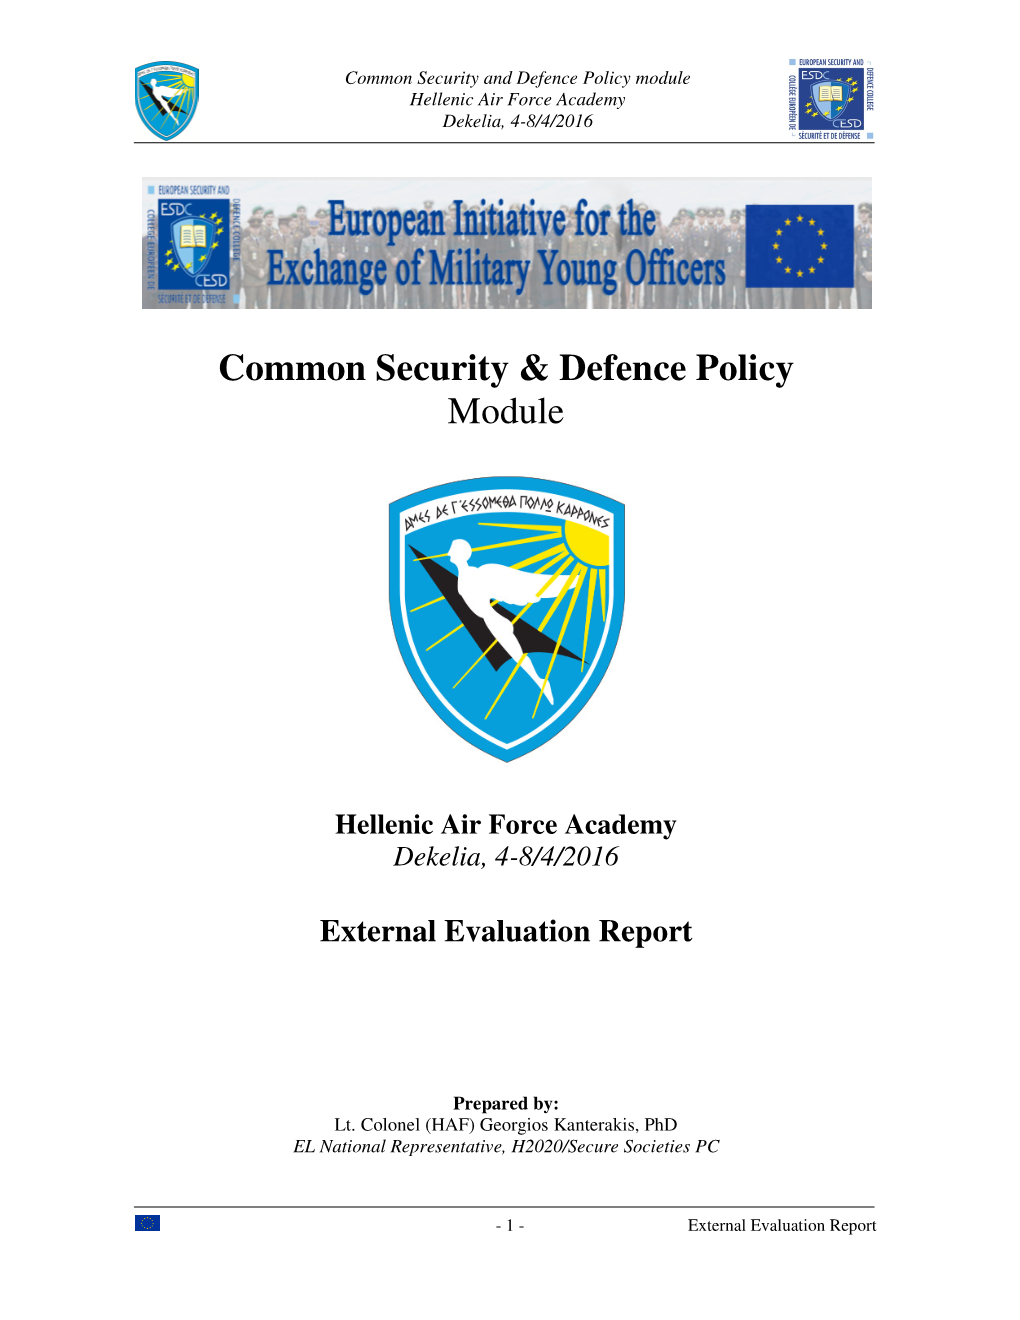 Common Security & Defence Policy Module